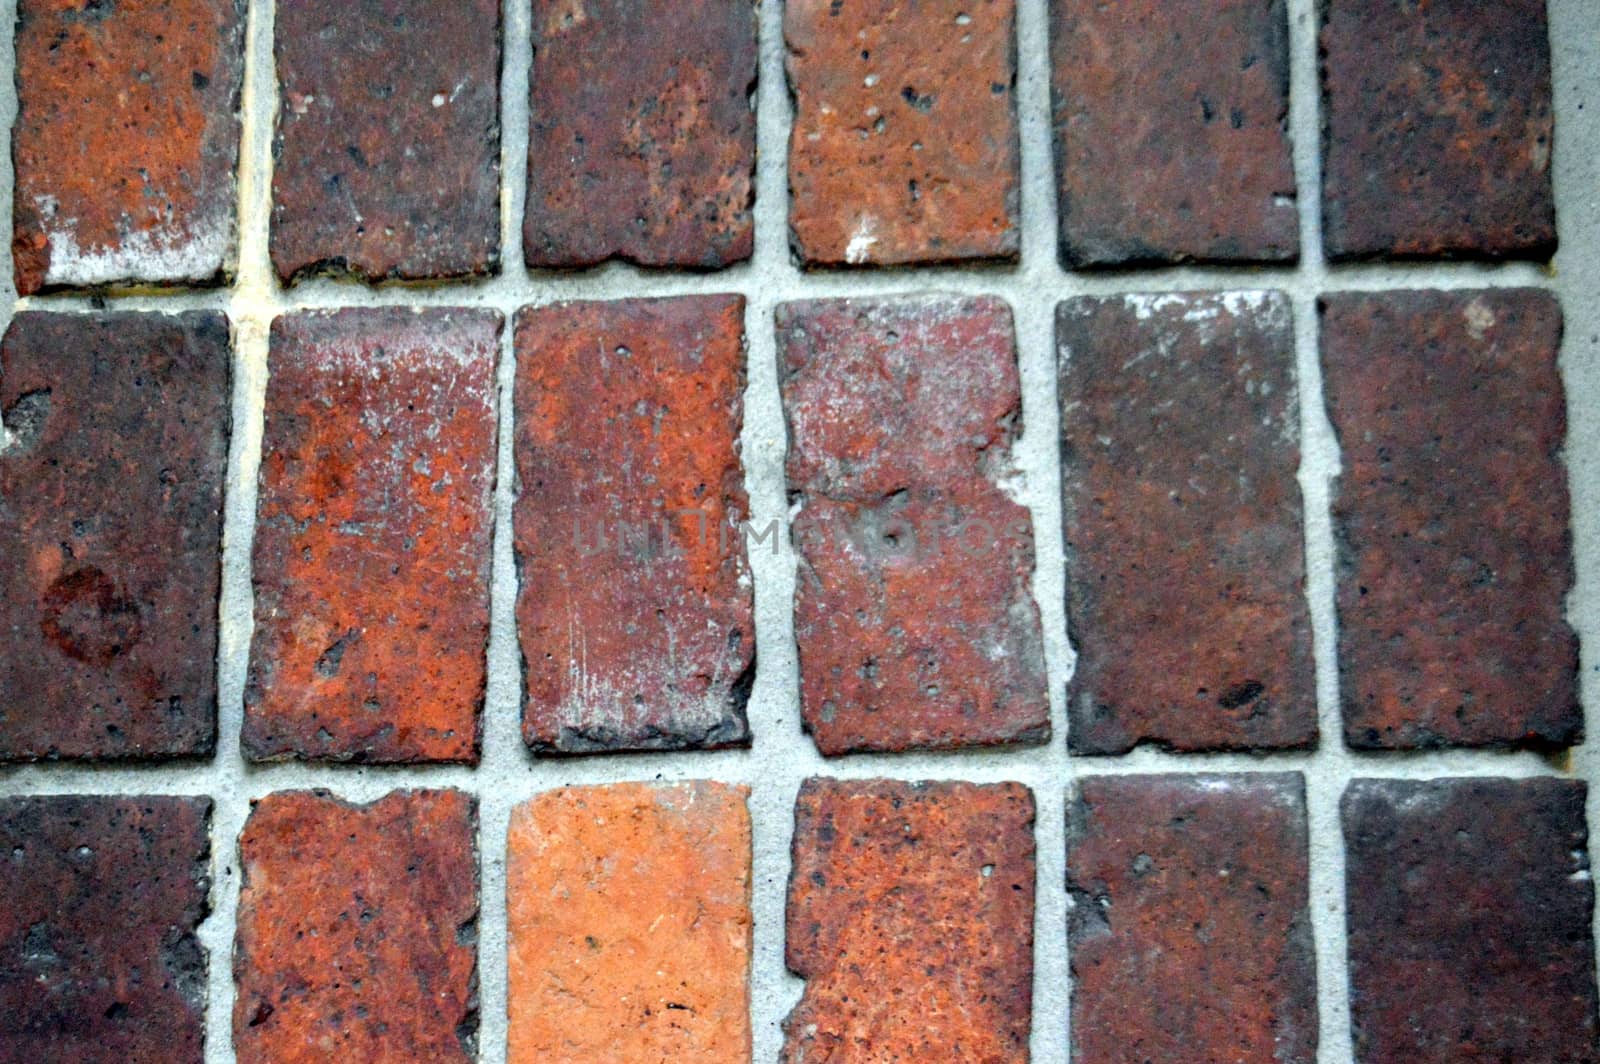 Lines of old red rectangular brick of an old ground